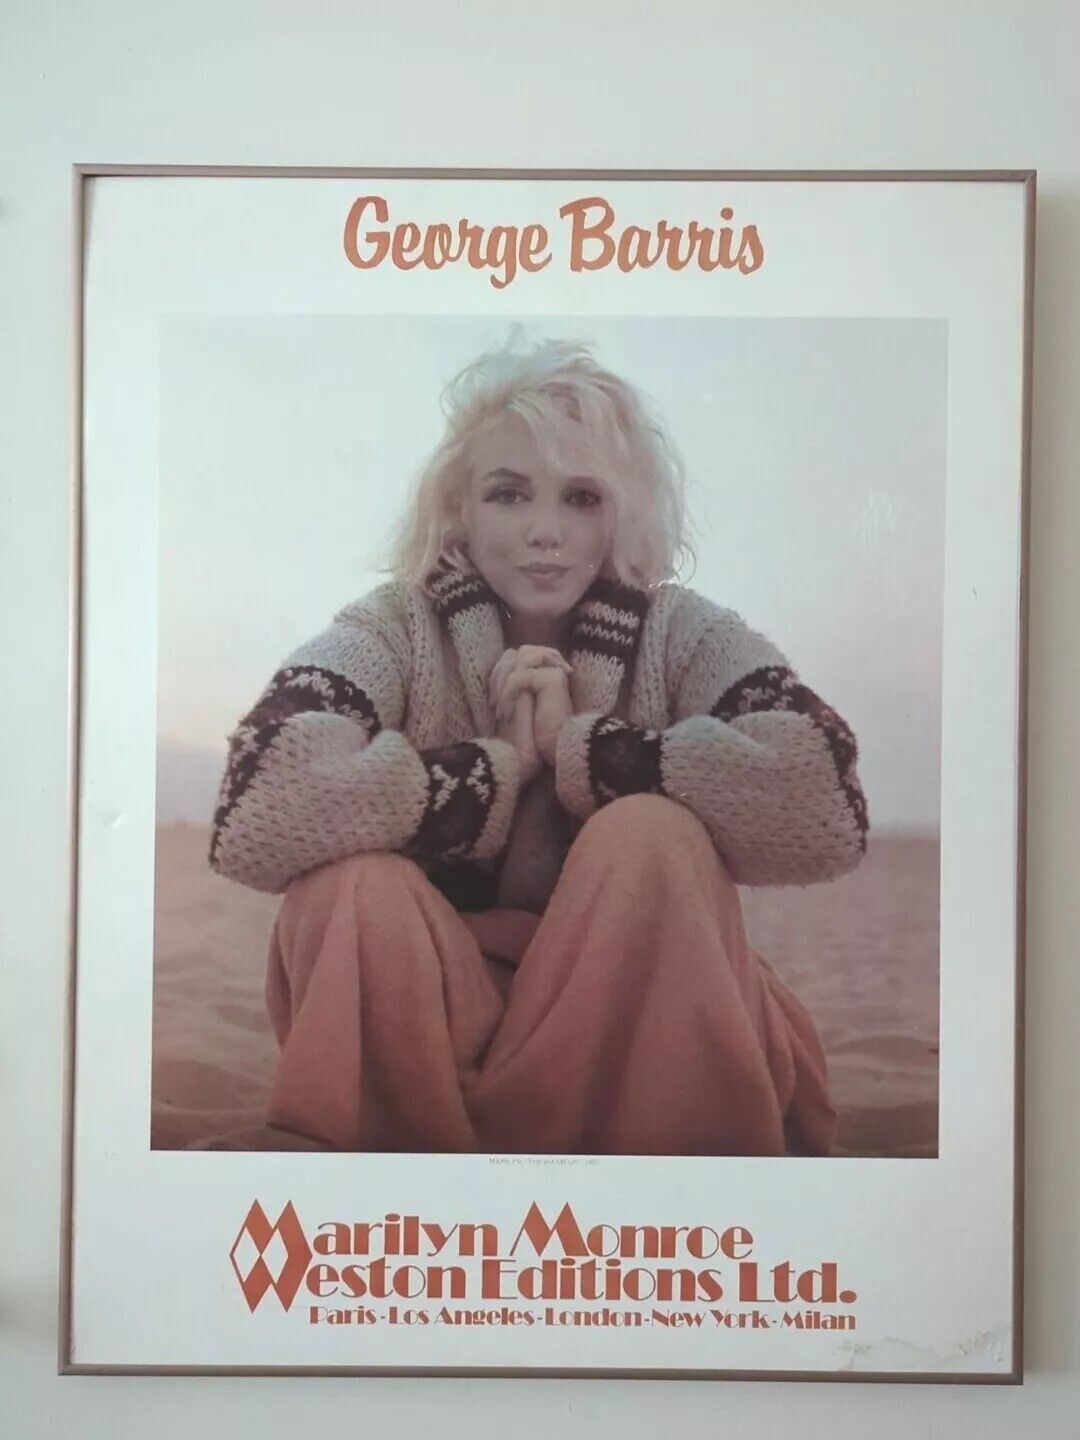 1962 George Barris “CHILLY WIND” Marilyn Monroe Poster Photo Print - Last shot 